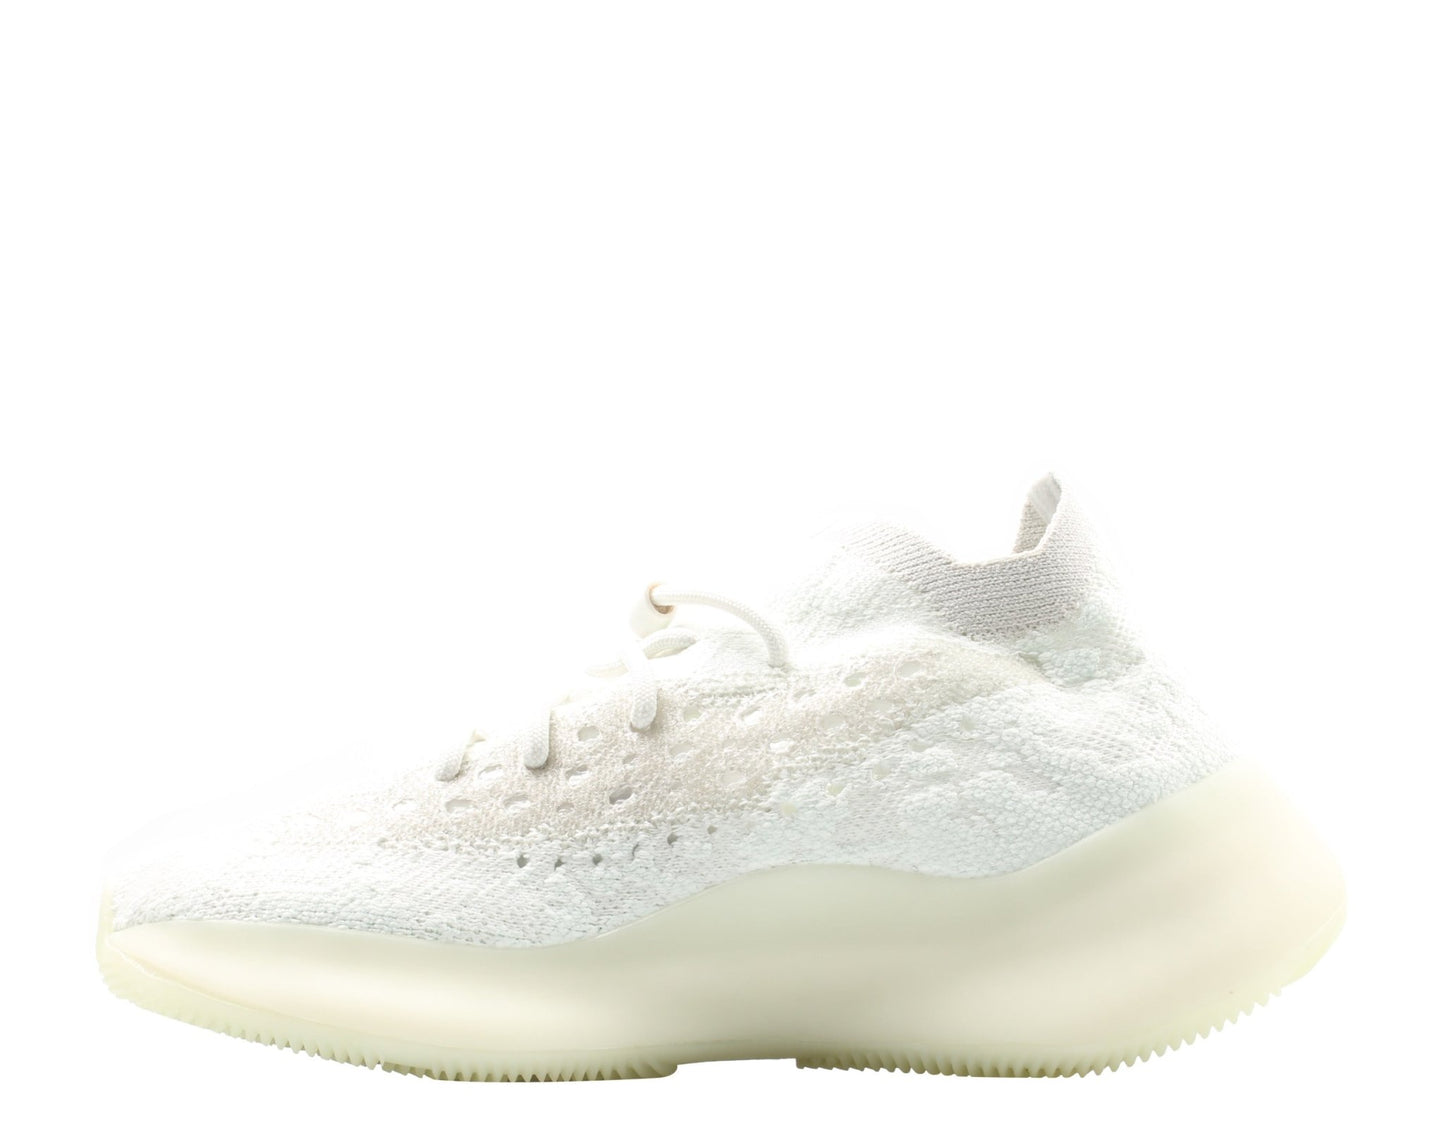 Adidas Yeezy Boost 380 - Calcite Glow Non-Reflective Men's Shoes GZ8668 - Becauze